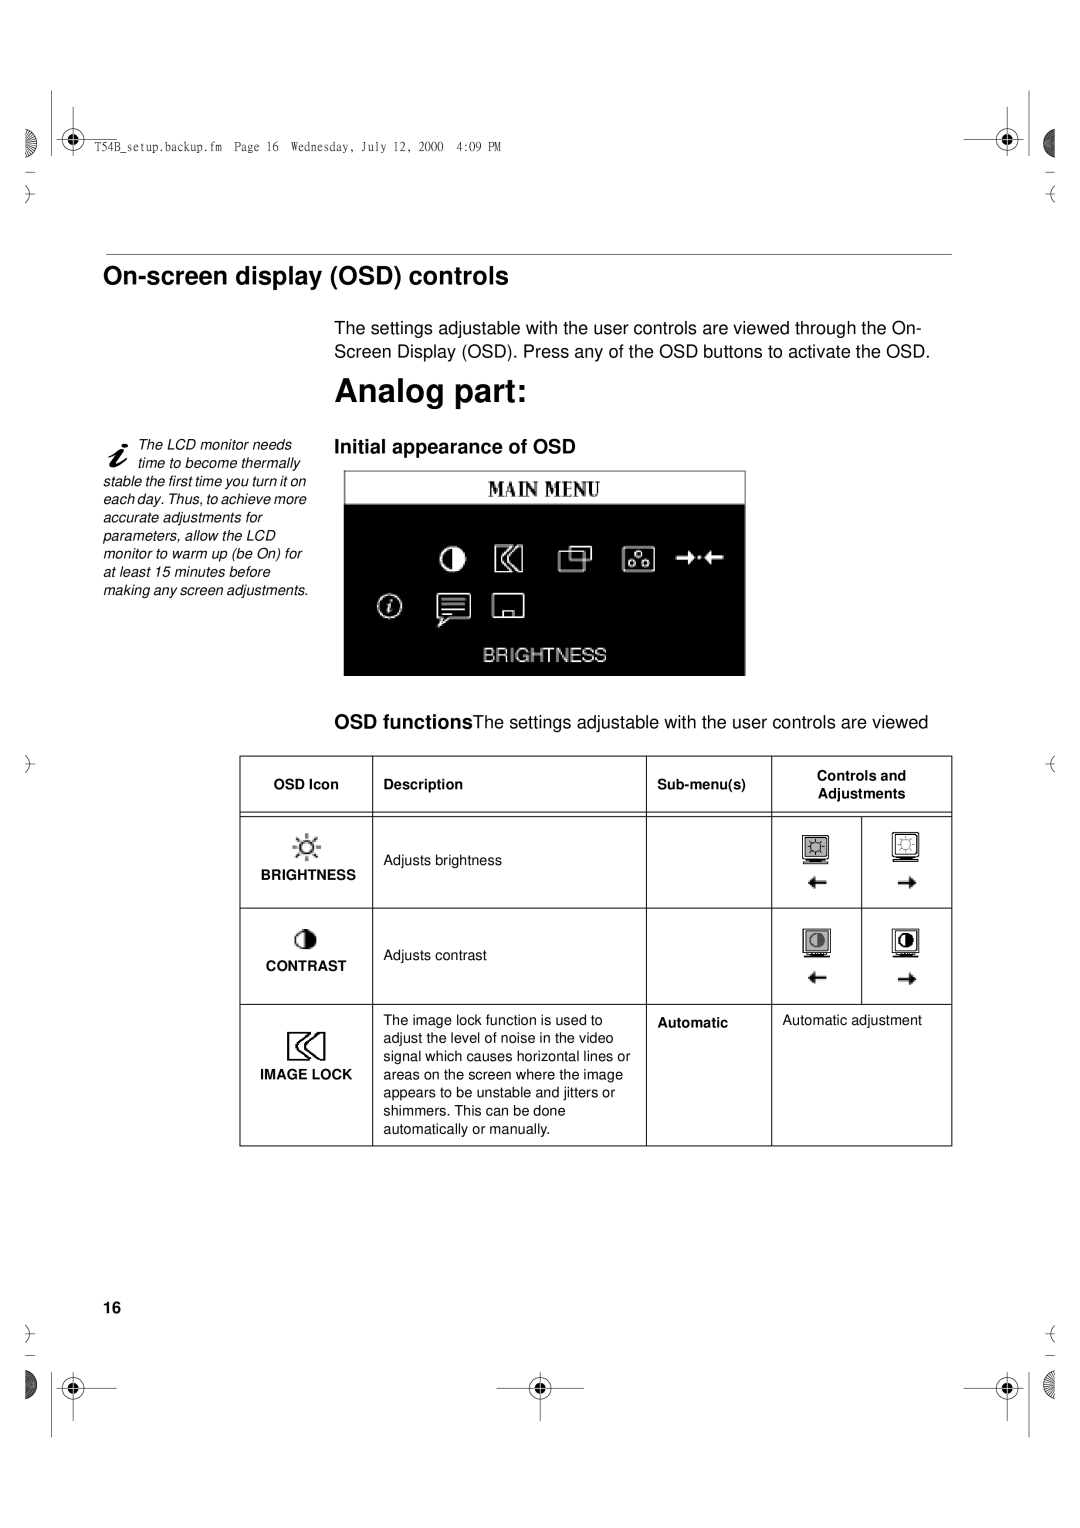 Lenovo T54H manual Analog part, On-screendisplay OSD controls, Initial appearance of OSD 